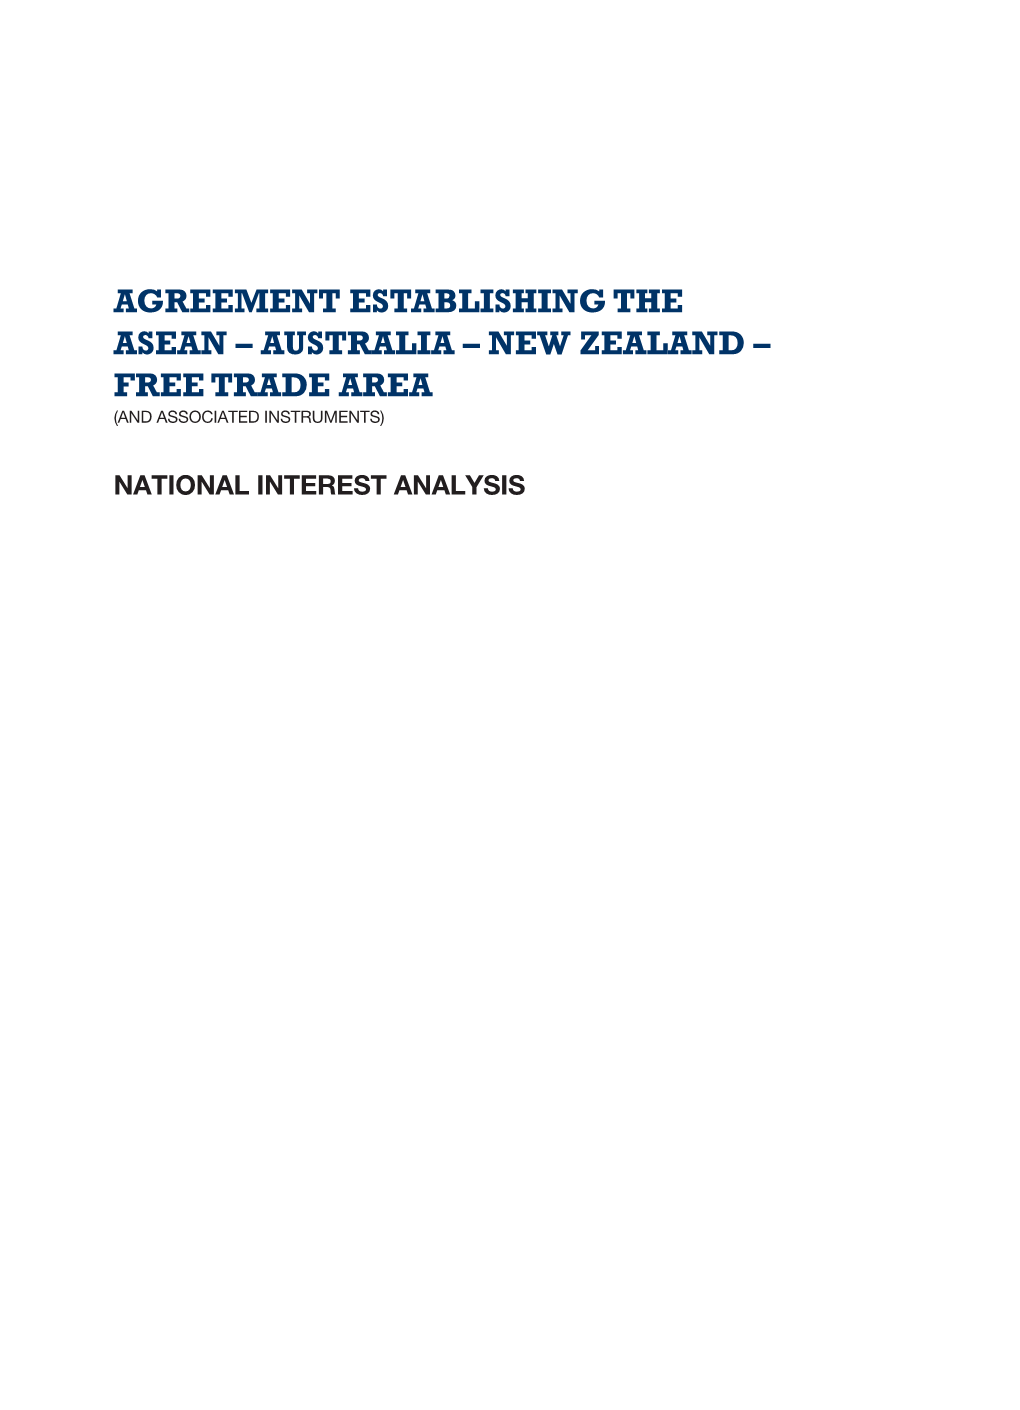 AGREEMENT ESTABLISHING the ASEAN – AUSTRALIA – NEW ZEALAND – FREE TRADE AREA (And Associated Instruments)